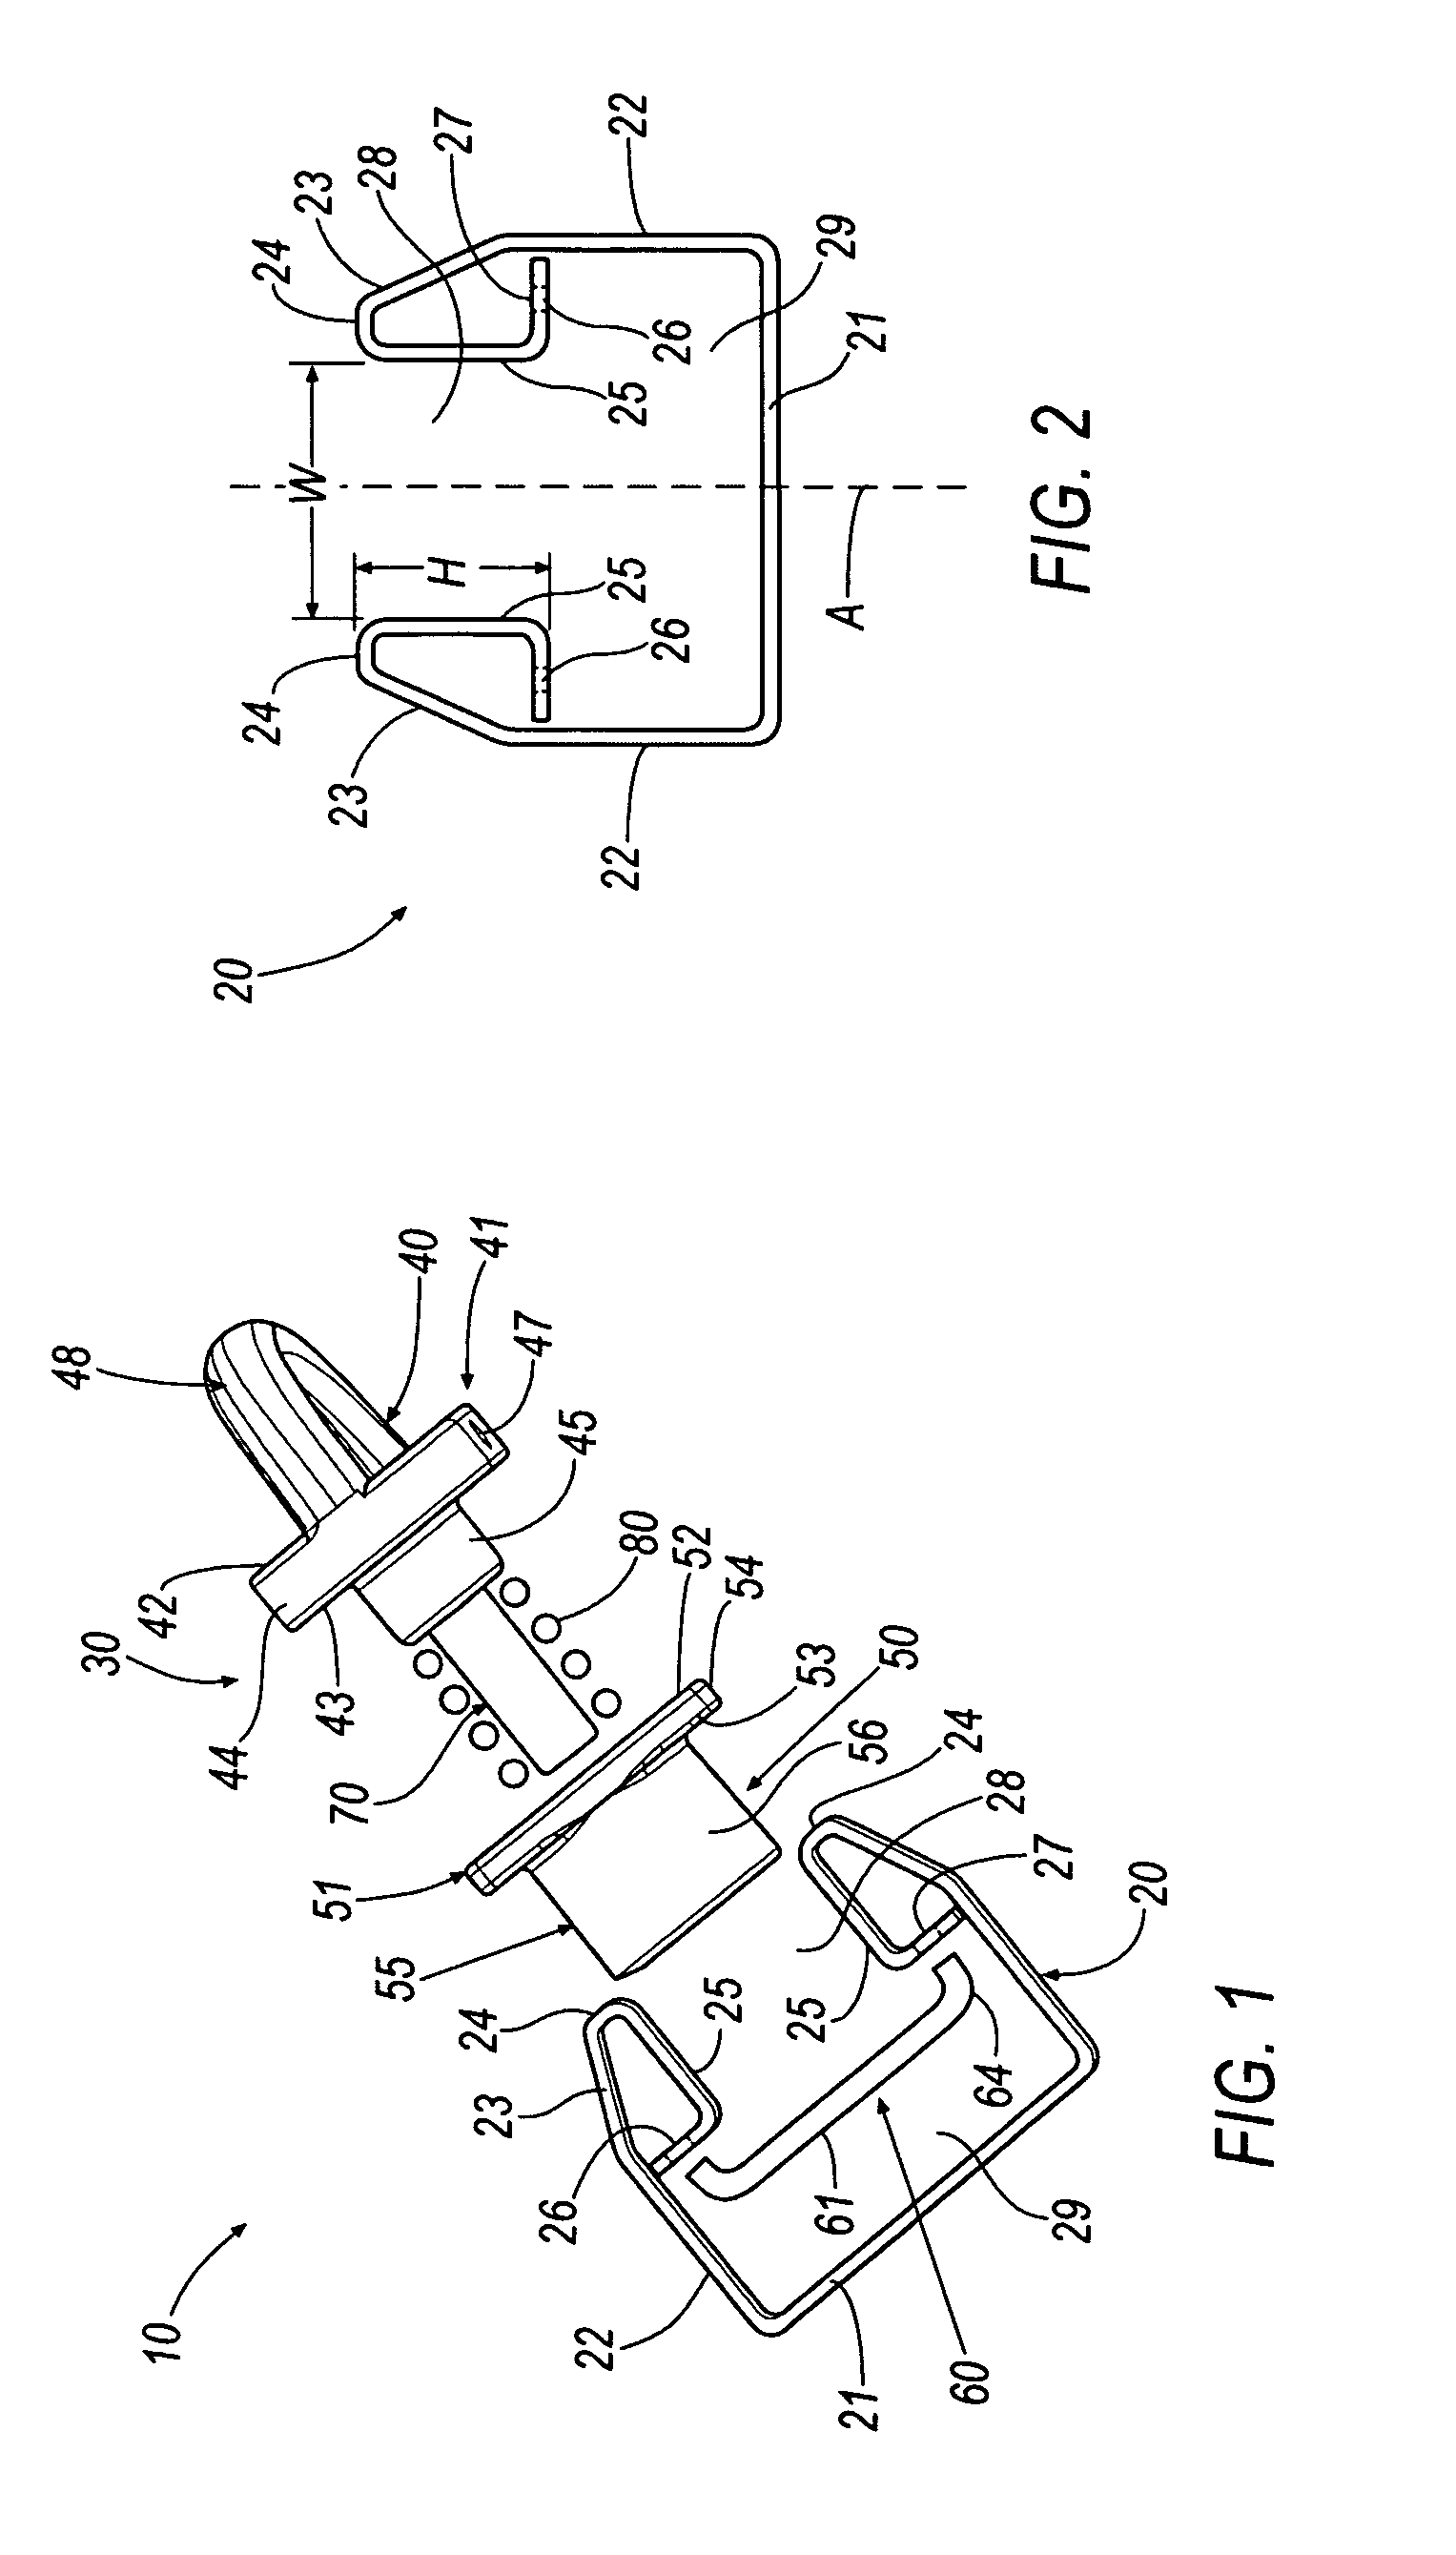 Adjustable tie down mechanism for roof rack and interior rail systems